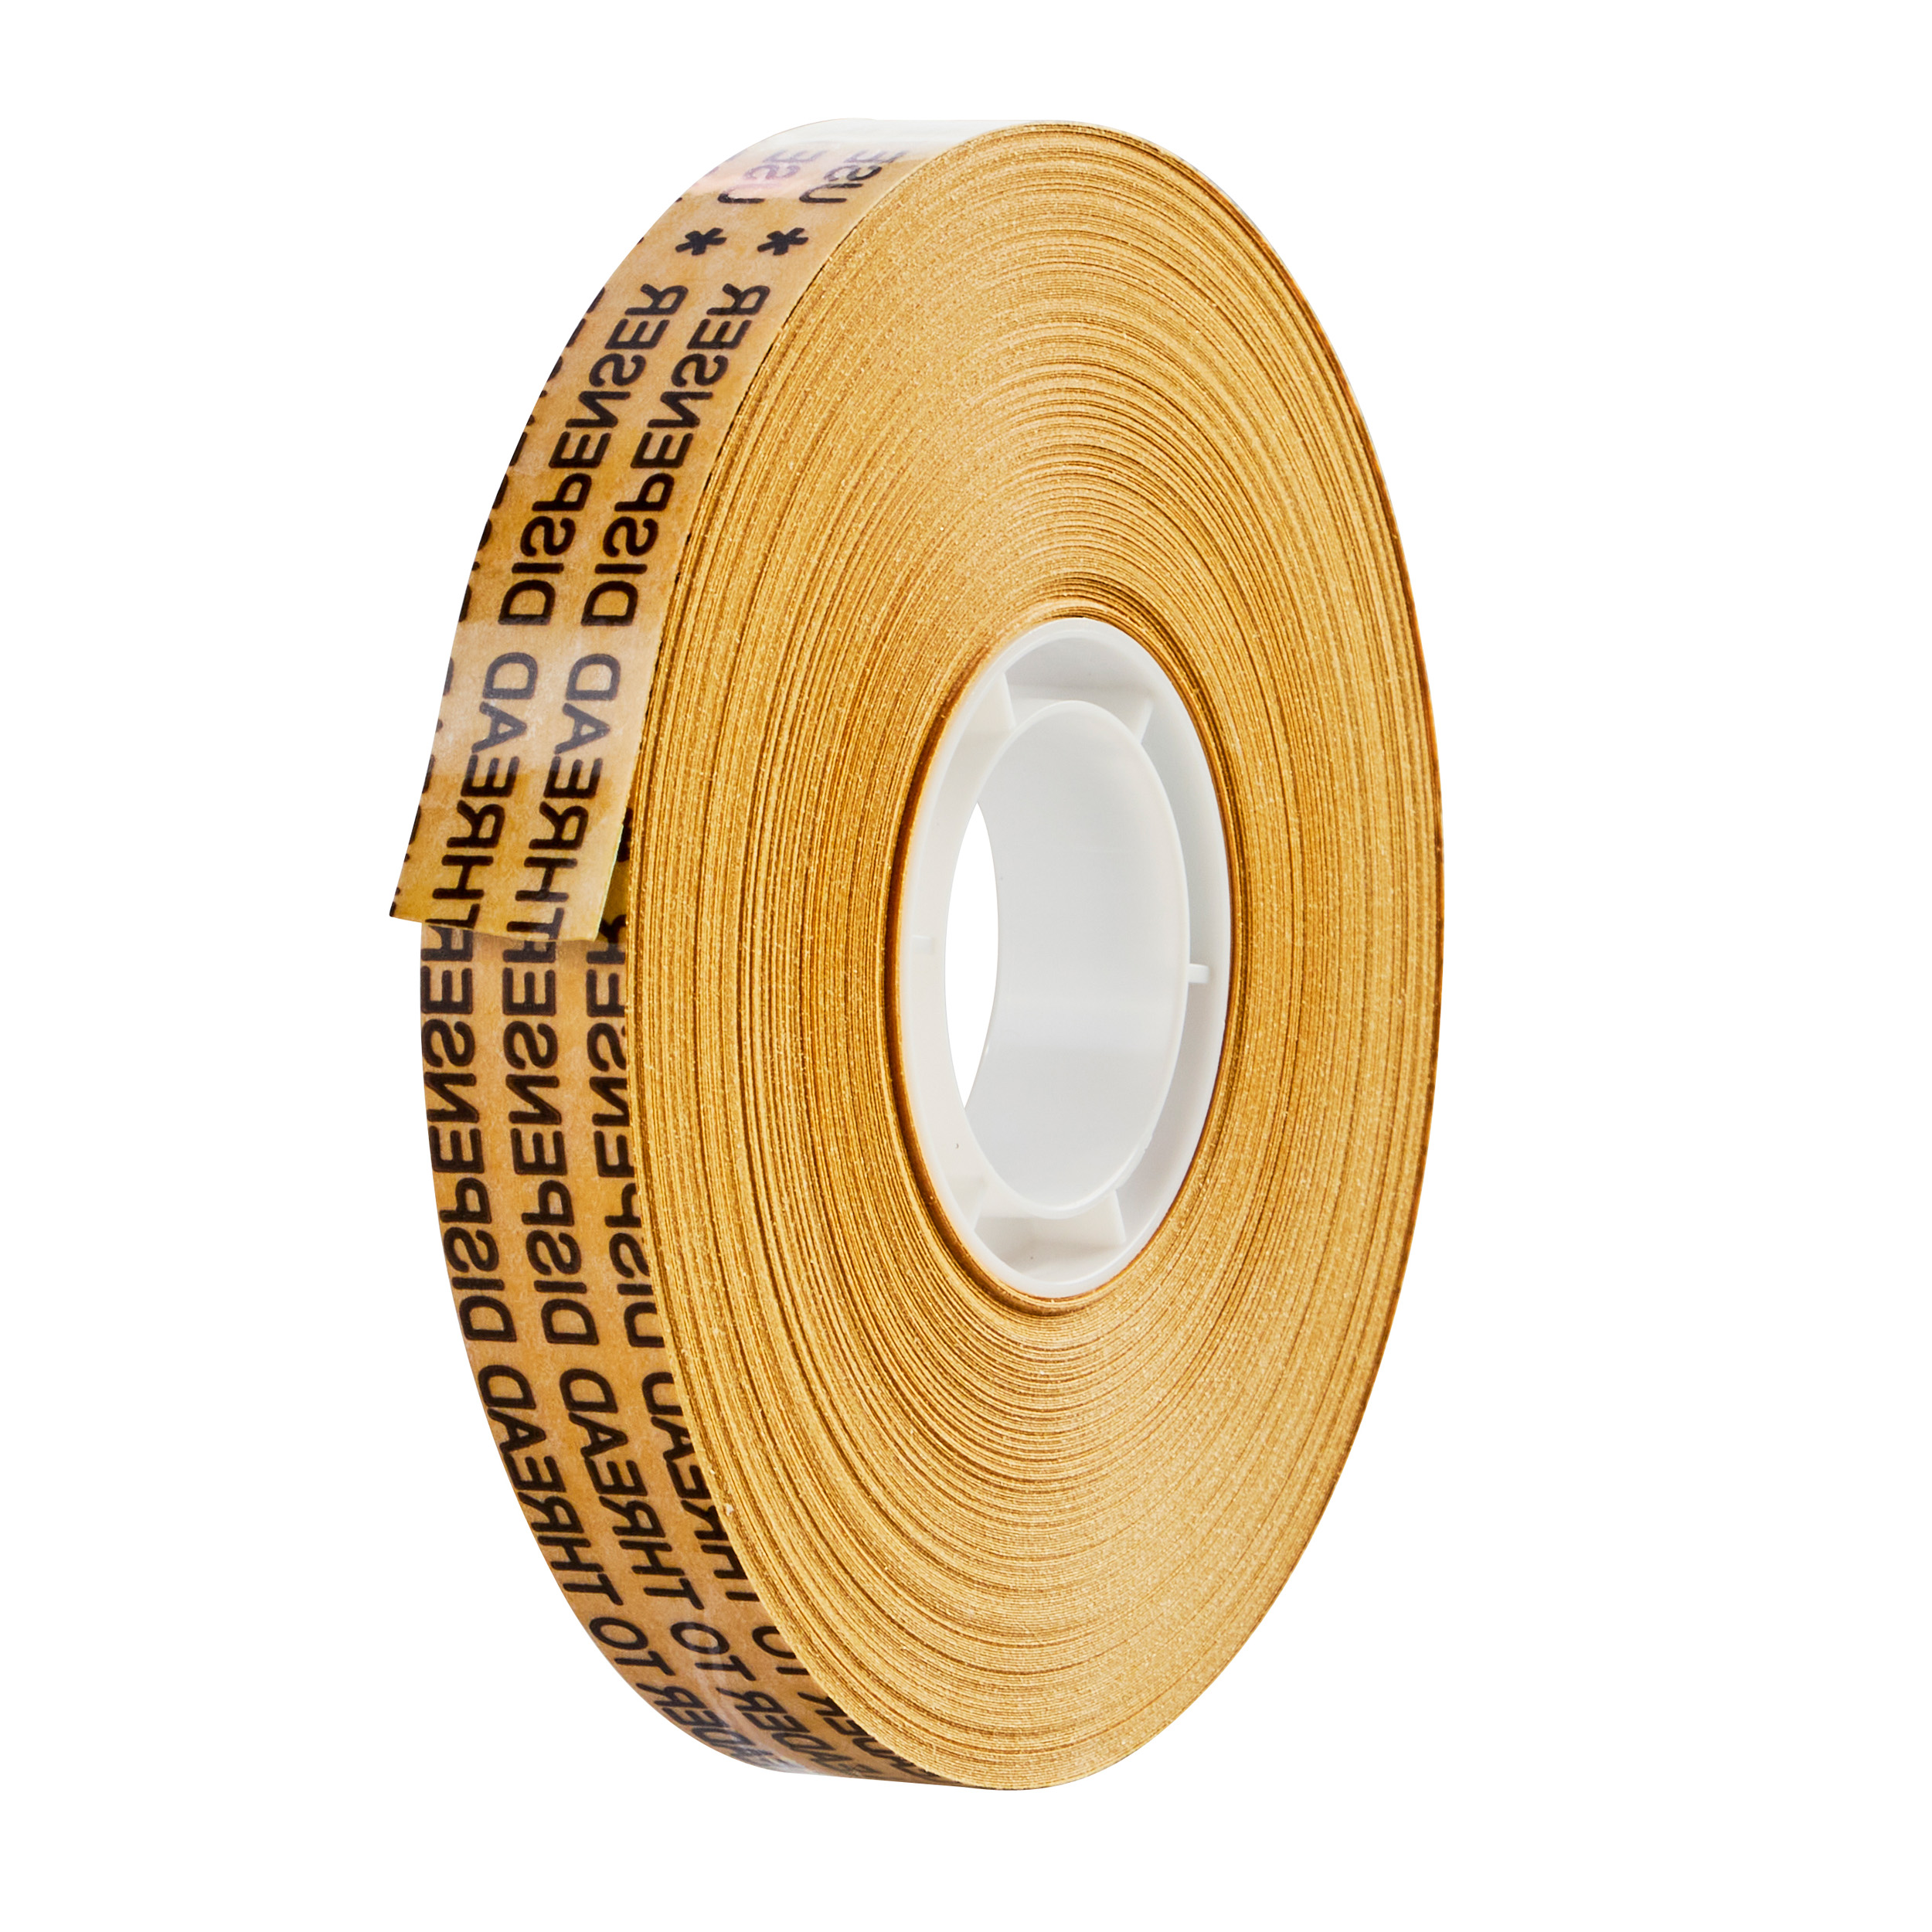 12 mm Double-sided paper fleece adhesive tape, very strong adhesive, for ATG  gun tape, VLM08